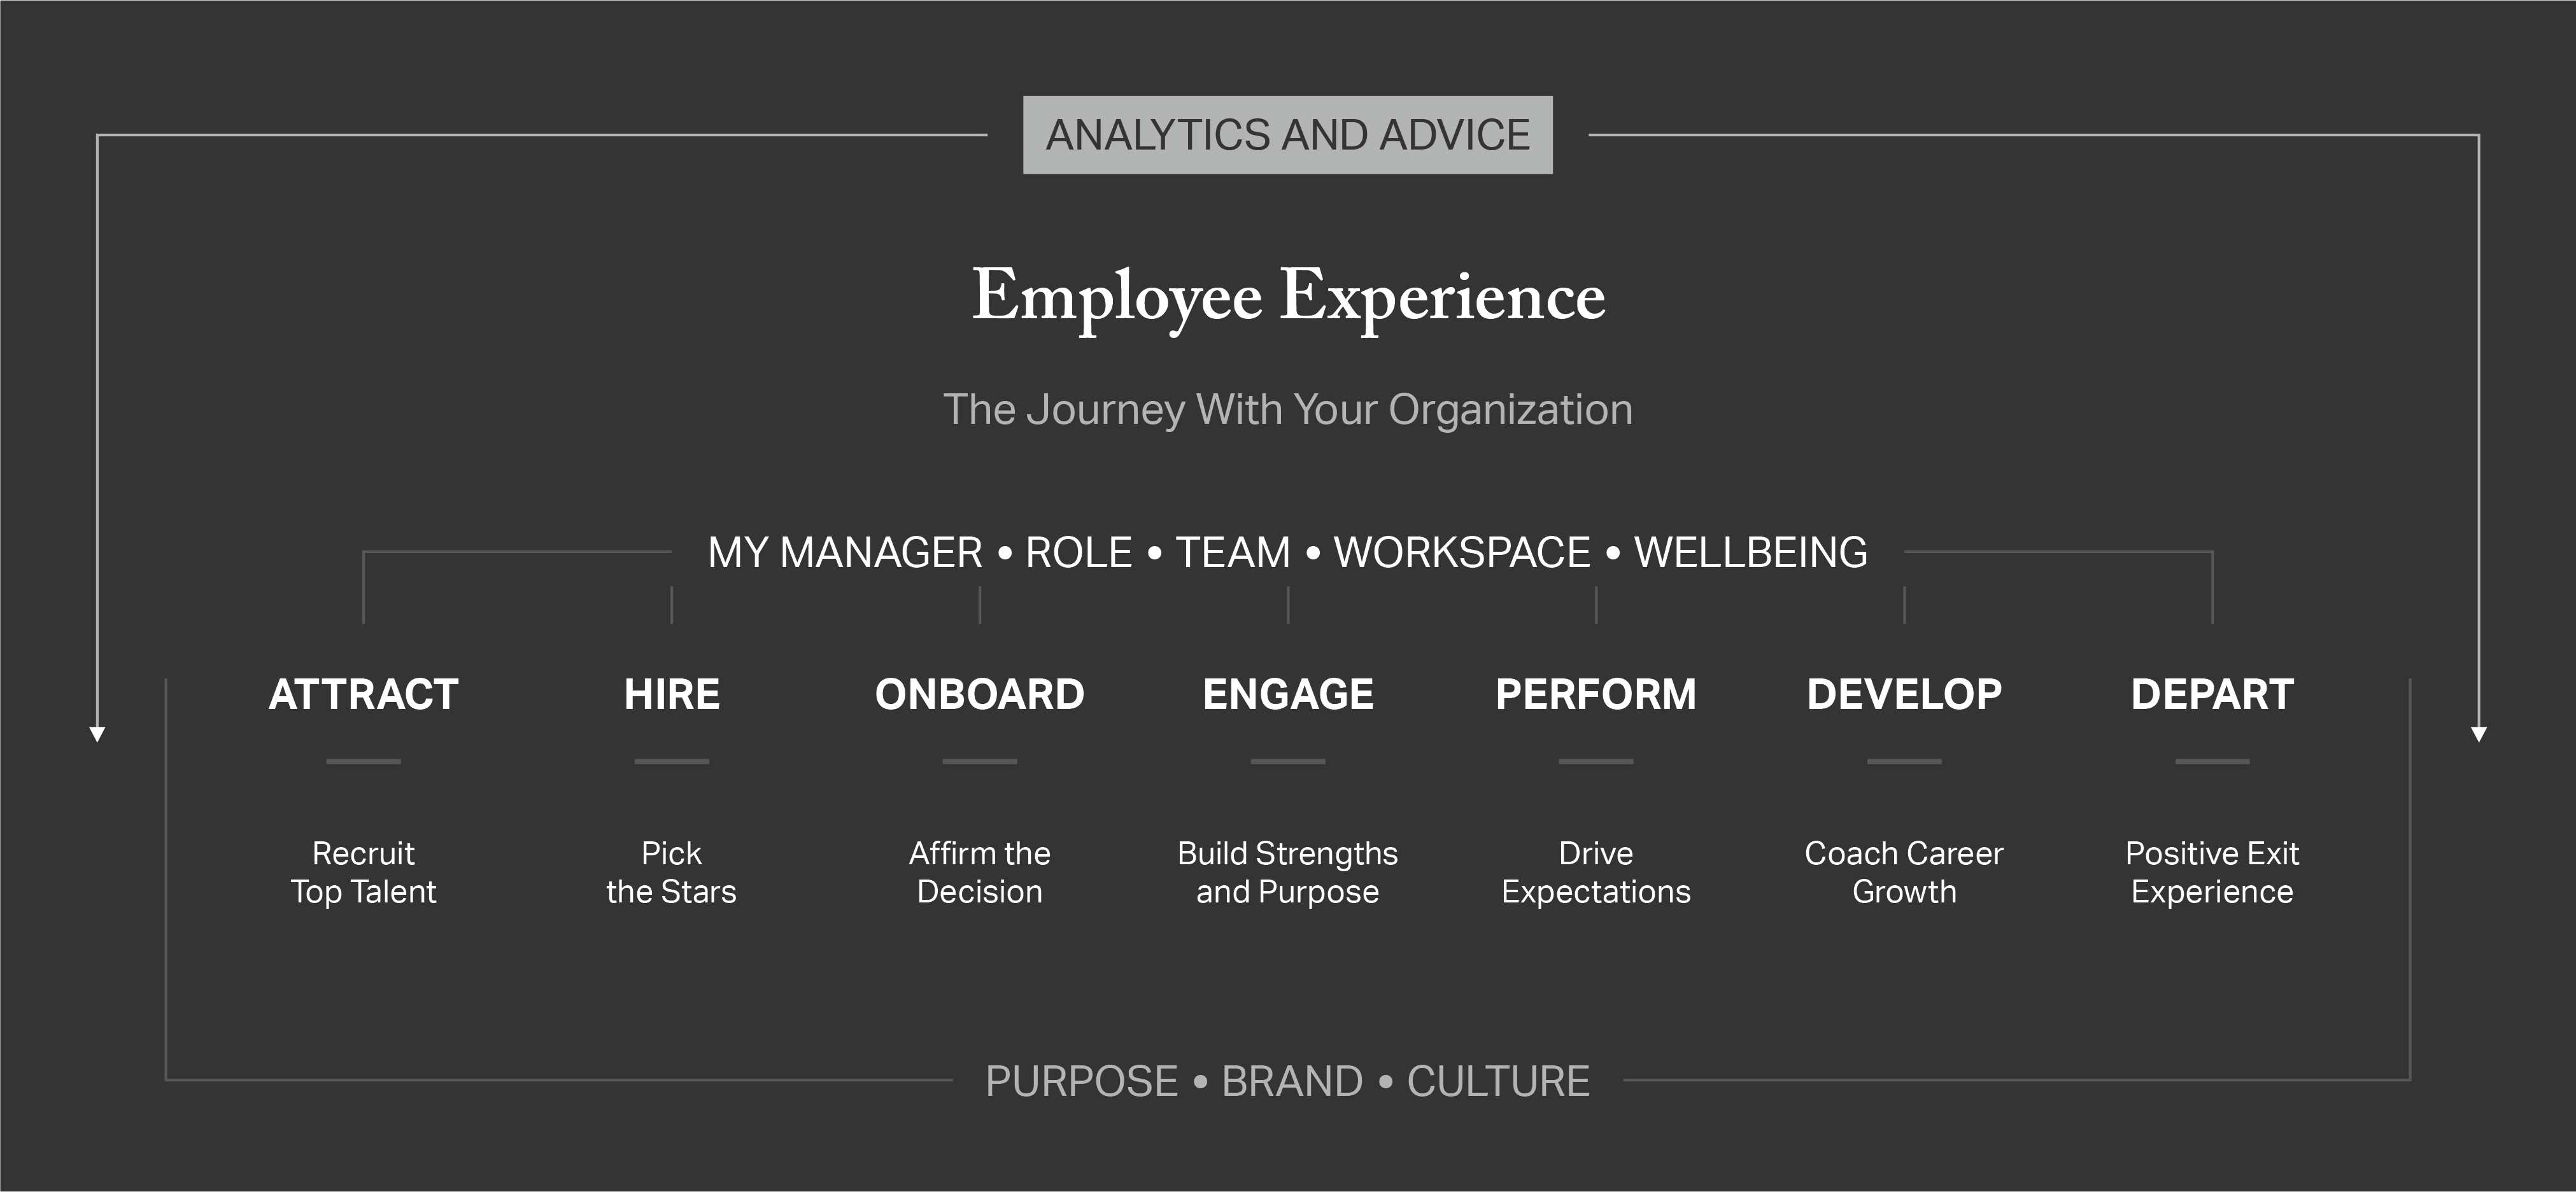 graphic showing the employee experience: attract, hire, onboard, engage, perform, develop and depart